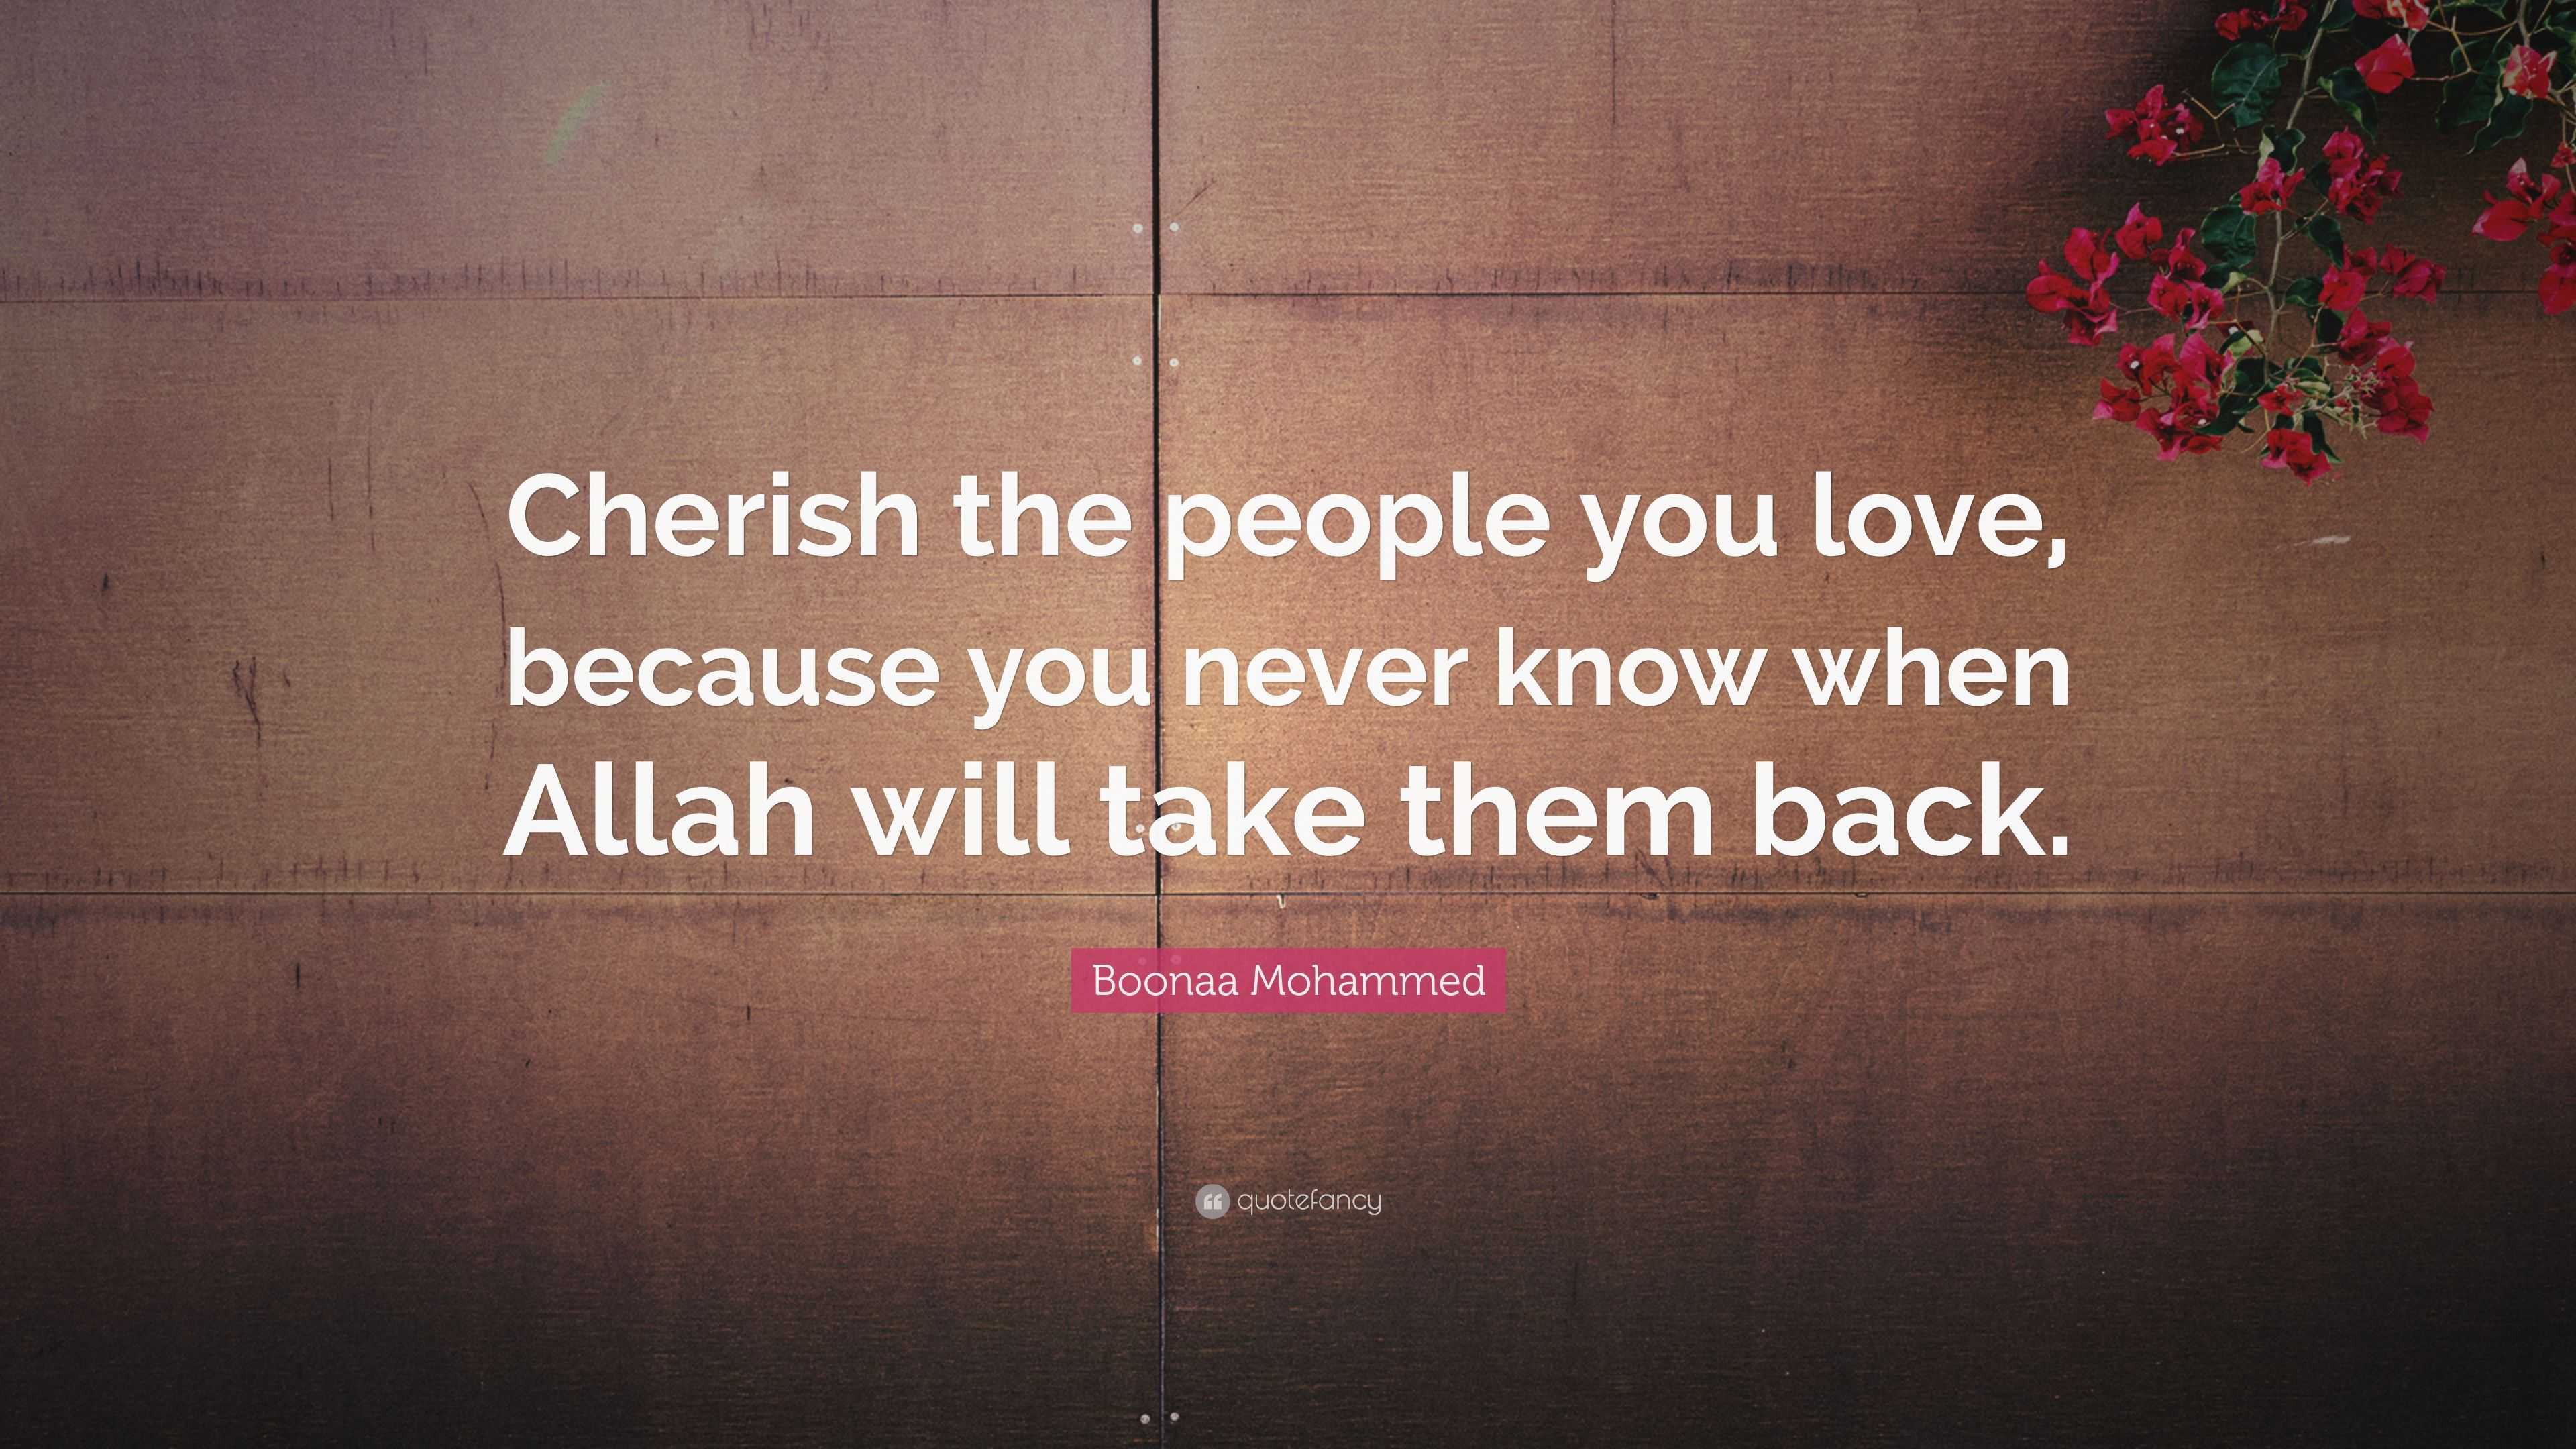 Boonaa Mohammed Quote “Cherish the people you love, because you never